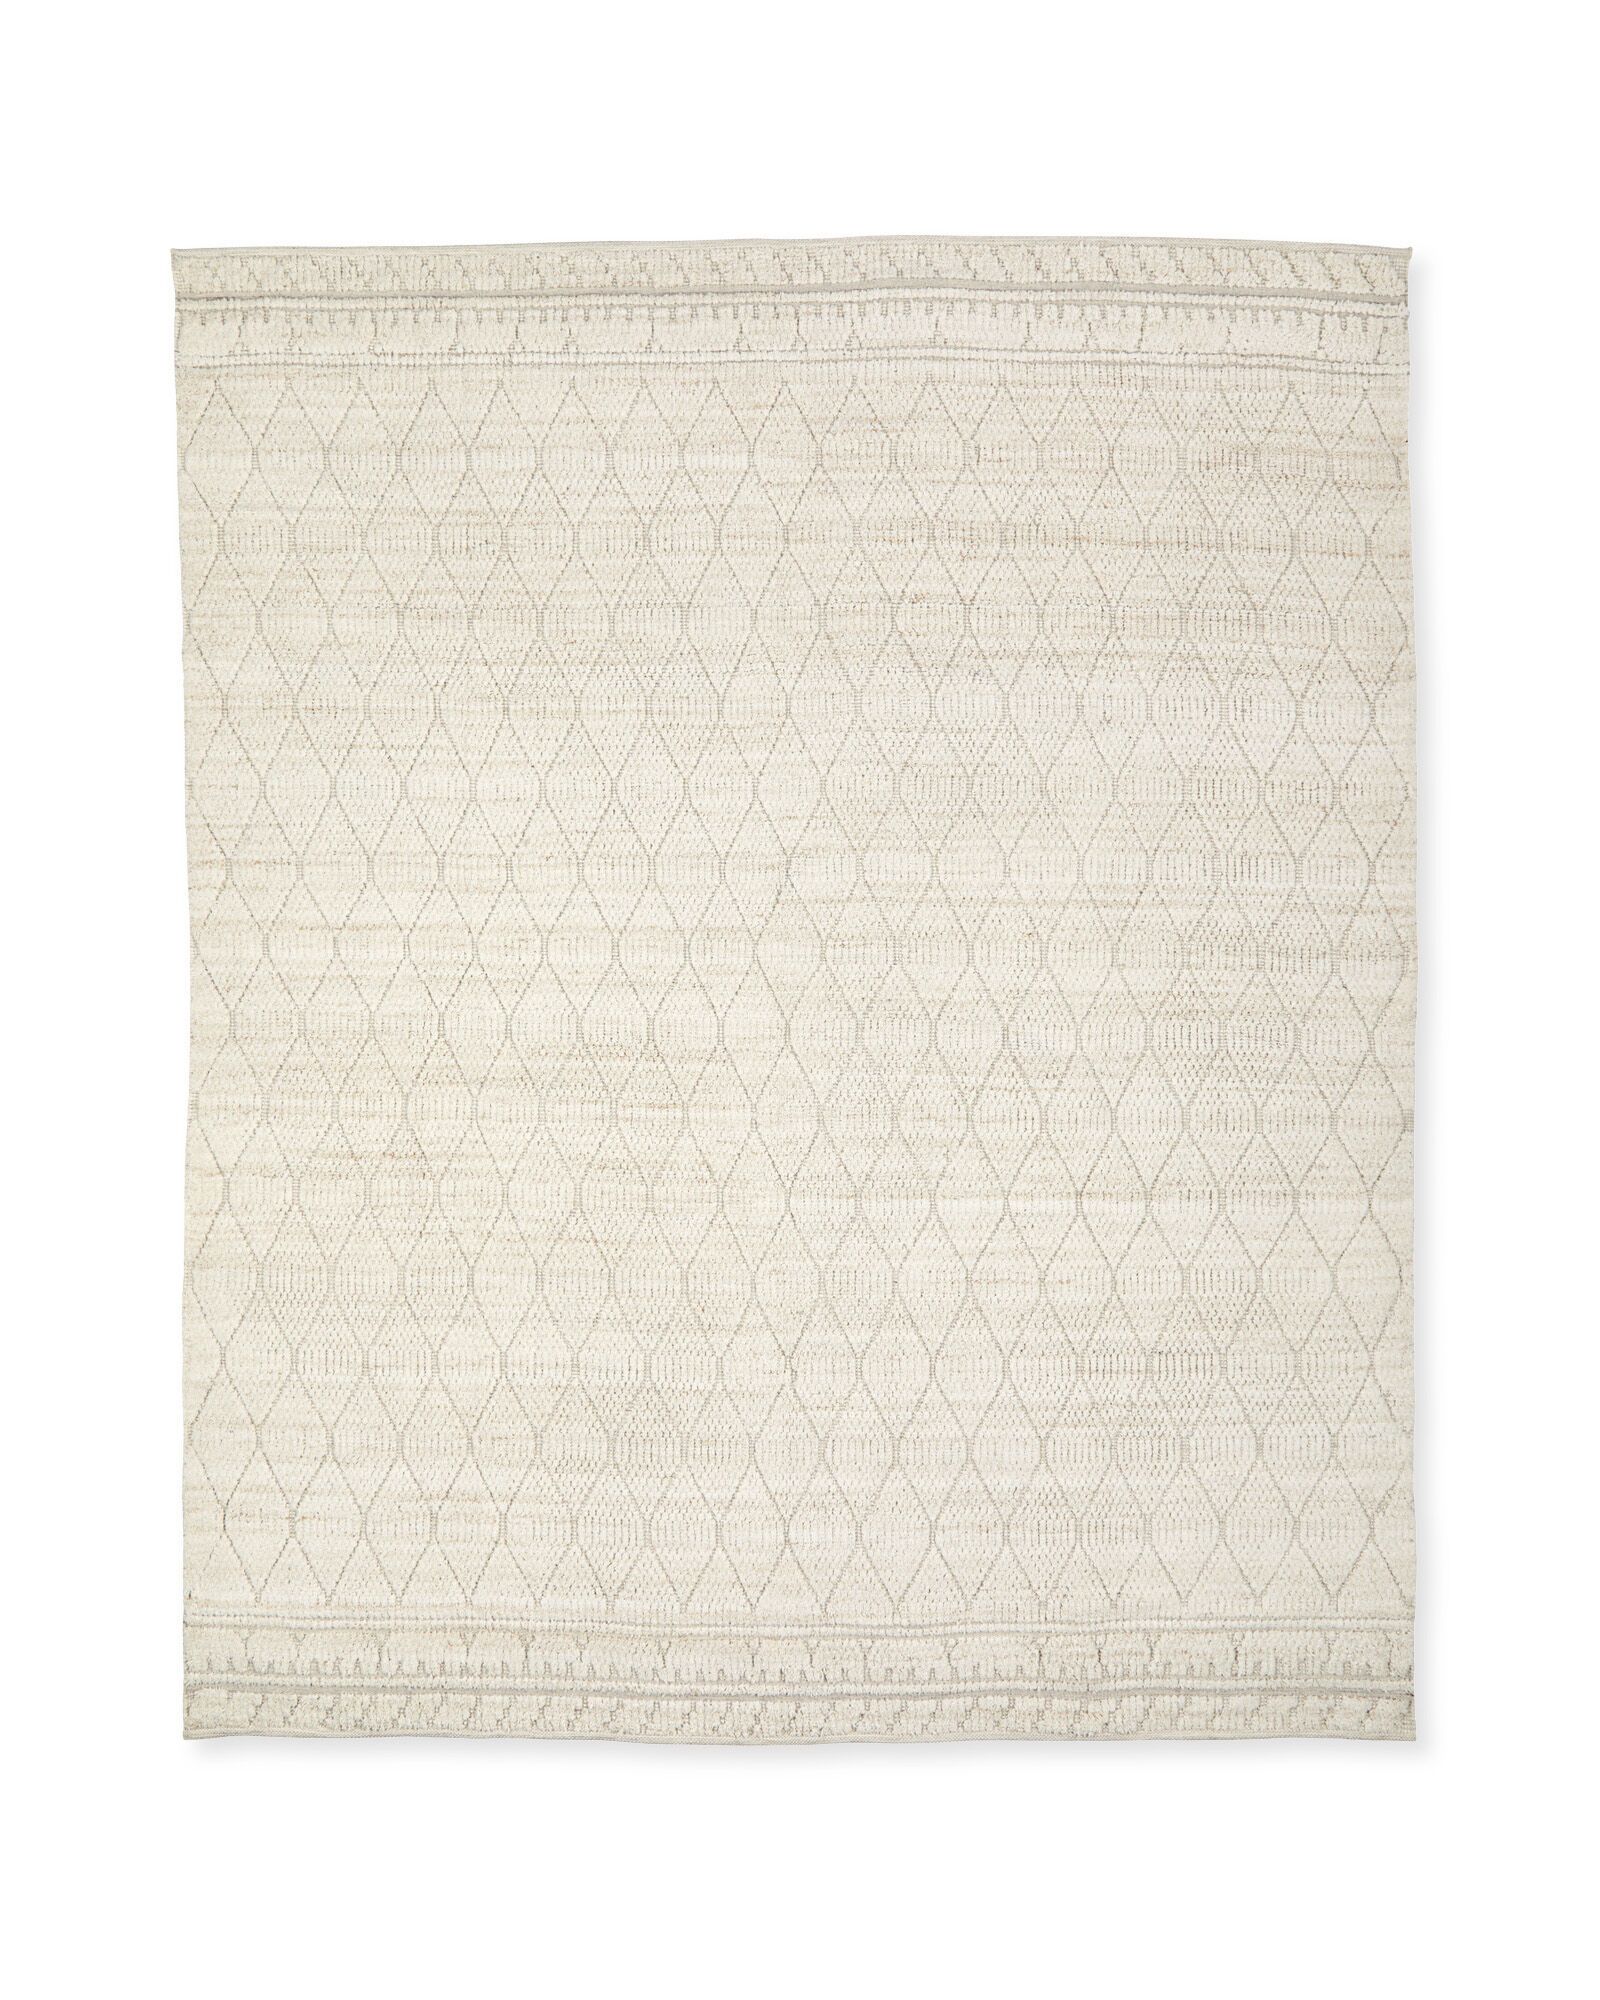 Whitehaven Rug | Serena and Lily